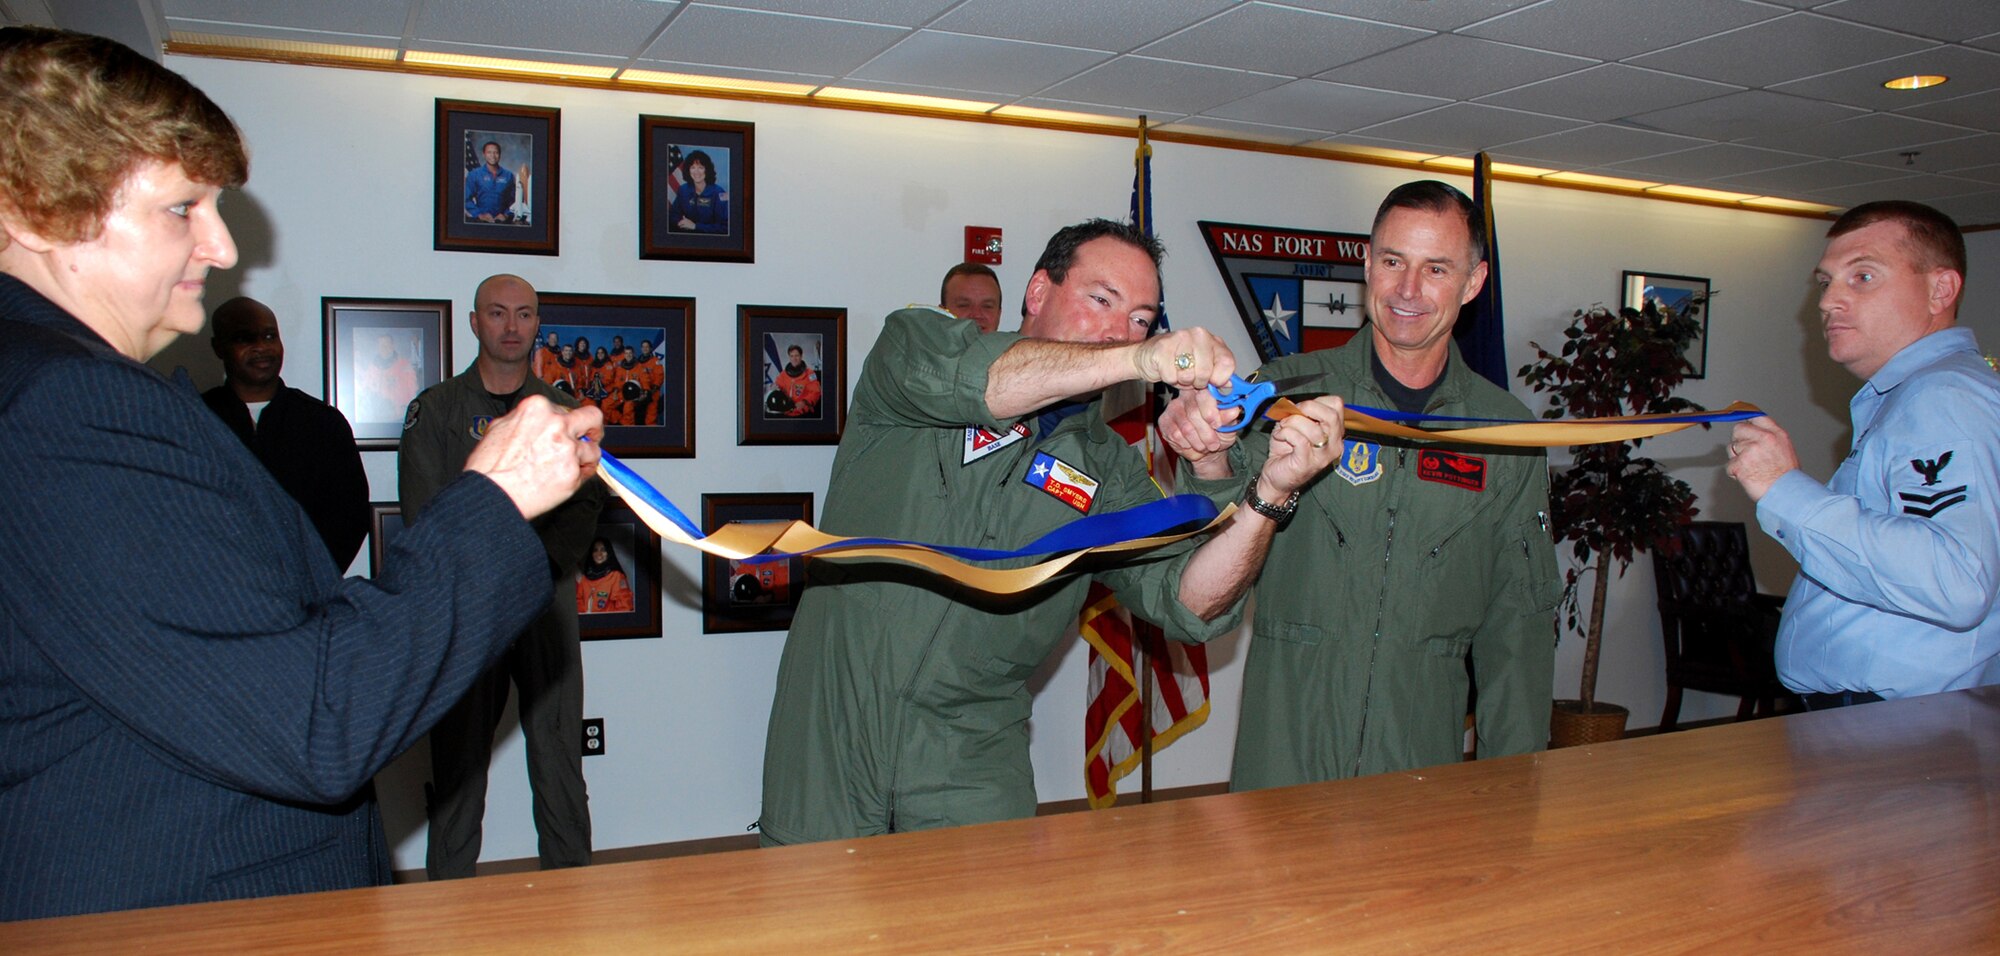 Navy Capt. T.D. Smyers, Naval Air Station Joint Reserve Base Fort Worth skipper, (center left), assists Col. Kevin Pottinger, 301st Fighter Wing commander, in a ribbon cutting signifying the offical opening of the Joint Air Space Facility. This newest joint venture for NAS JRB Fort Worth combines the Navy and Air Force assests for all incoming and outgoing Air Space requests. Ann Marchione, 301st FW Air Traffic Control specialist, holds the left end of the ribbon with Navy counterpart, Petty Officer 2nd Class Genz holding the right. (U.S. Air Force Photo/Tech. Sgt. Julie Briden-Garcia)